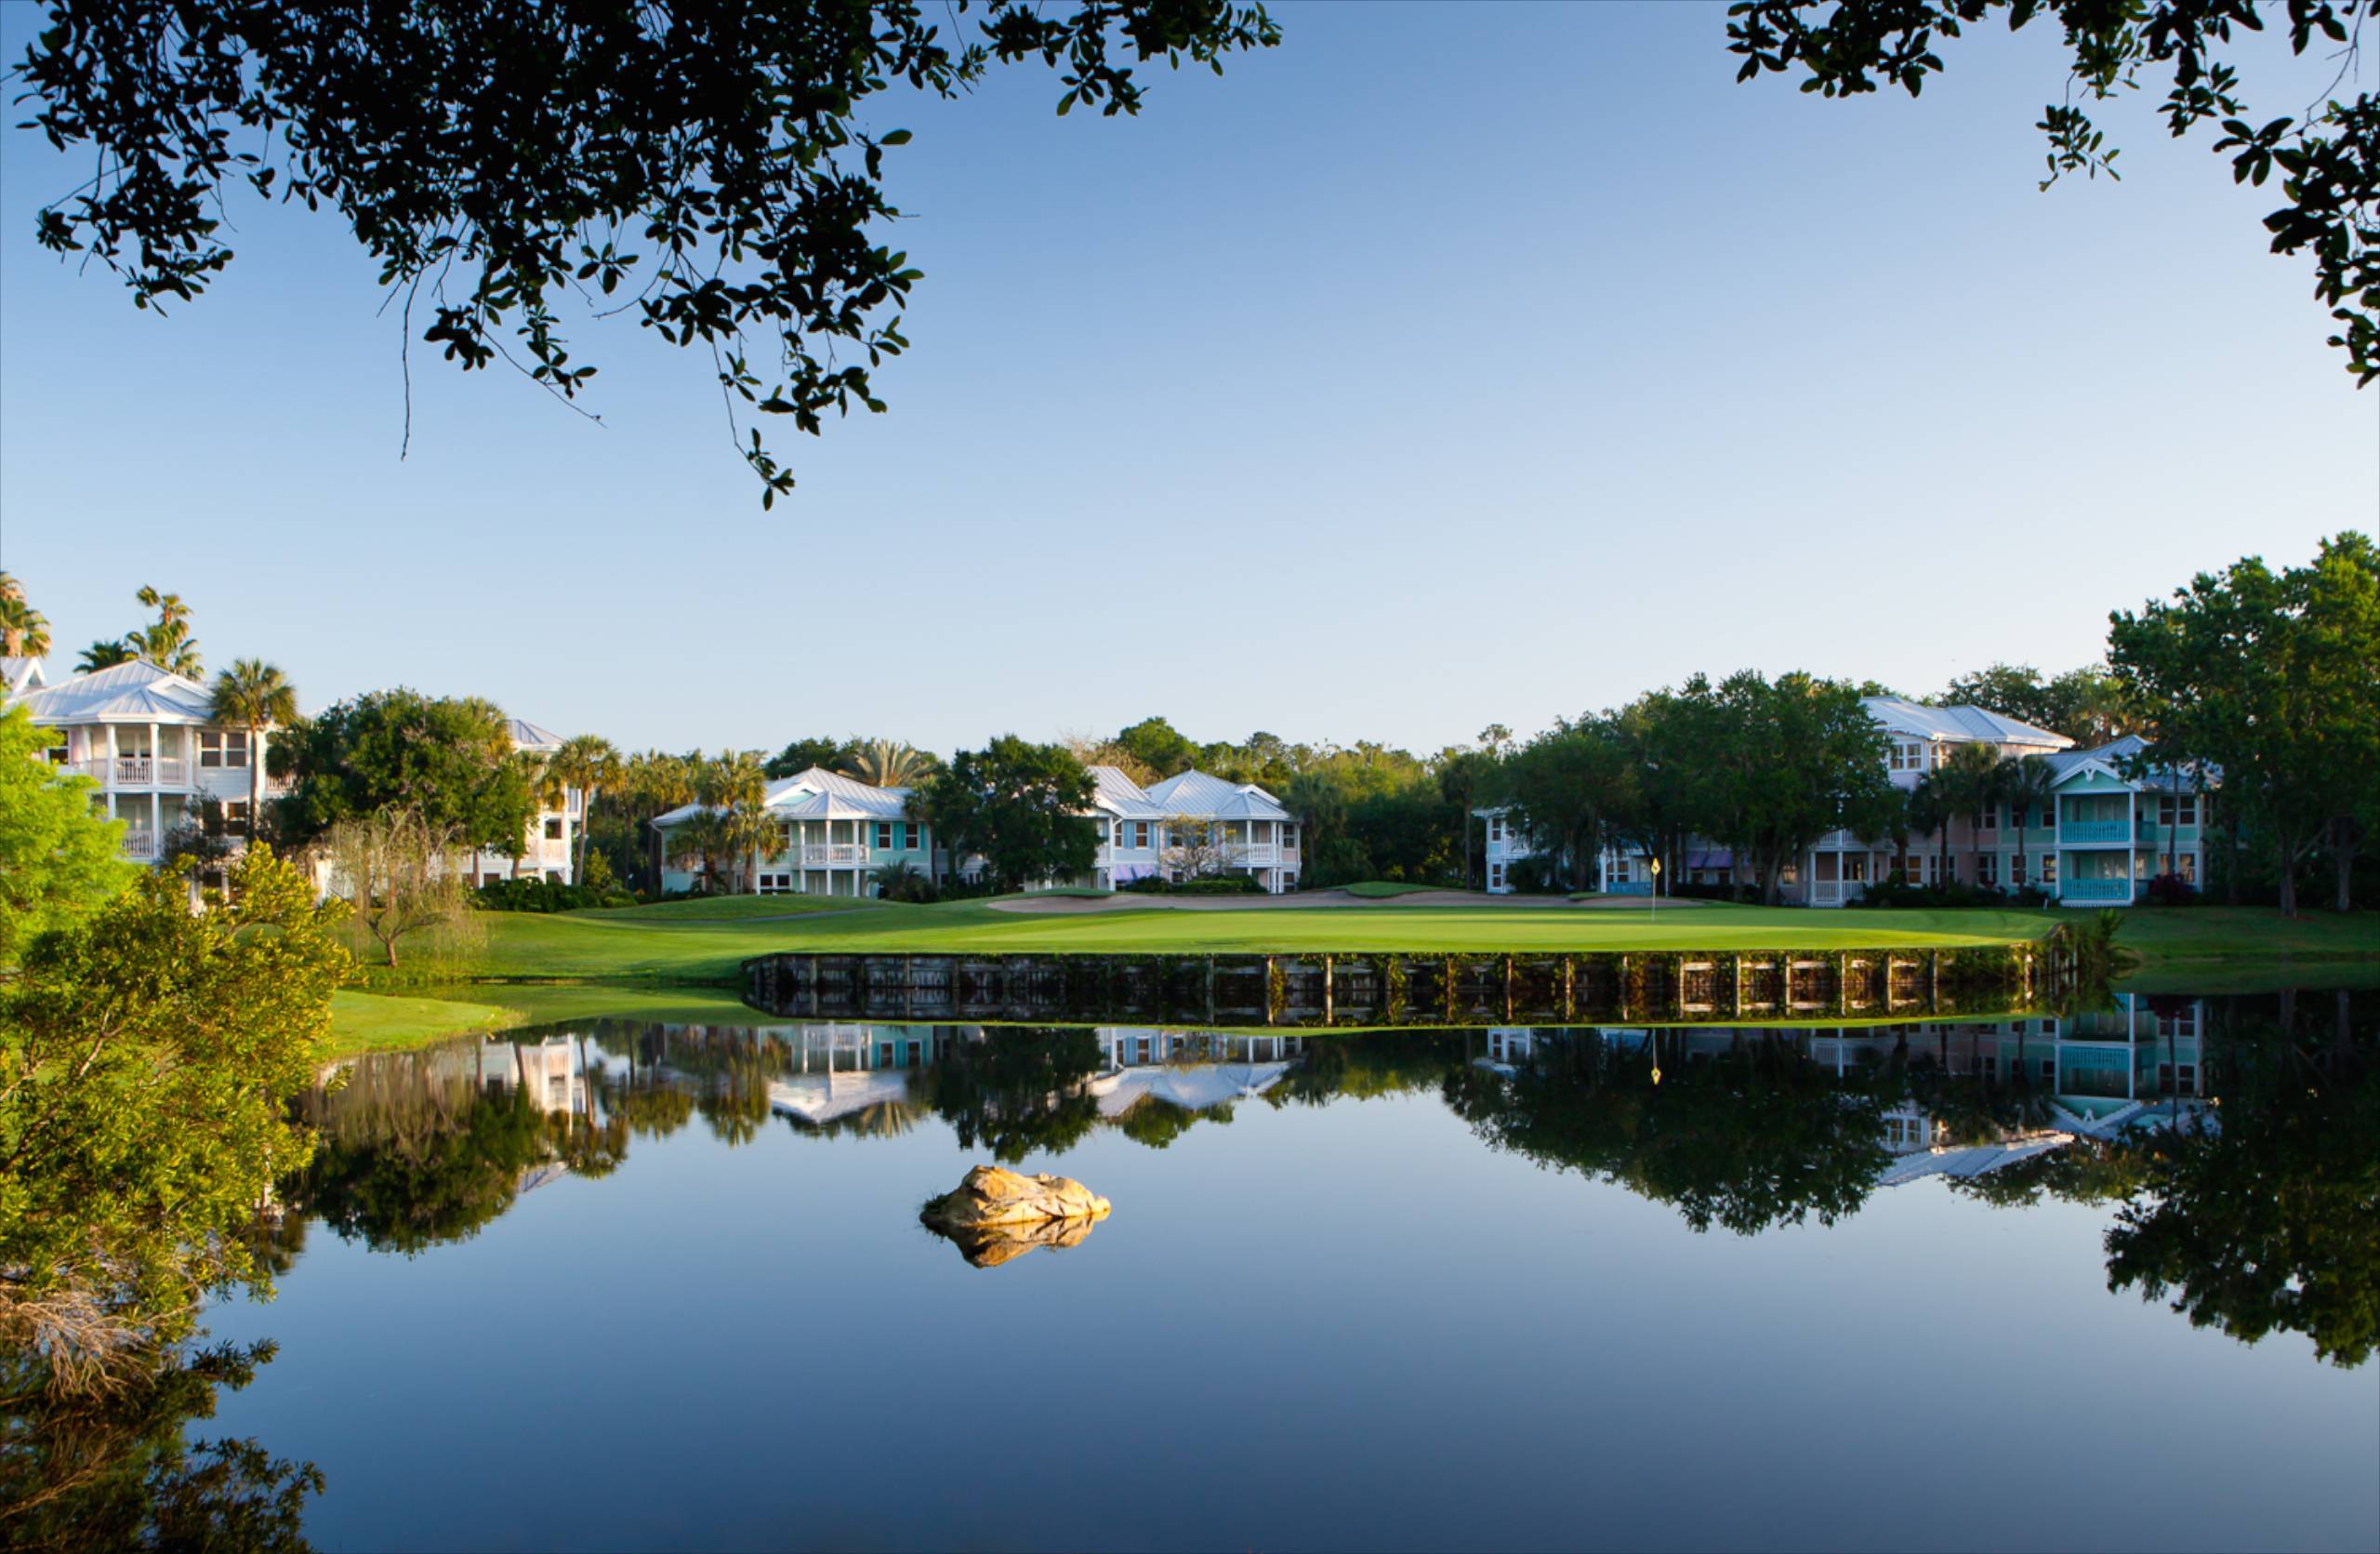 Complimentary golf club rental for guests staying at Walt Disney World Resort hotels